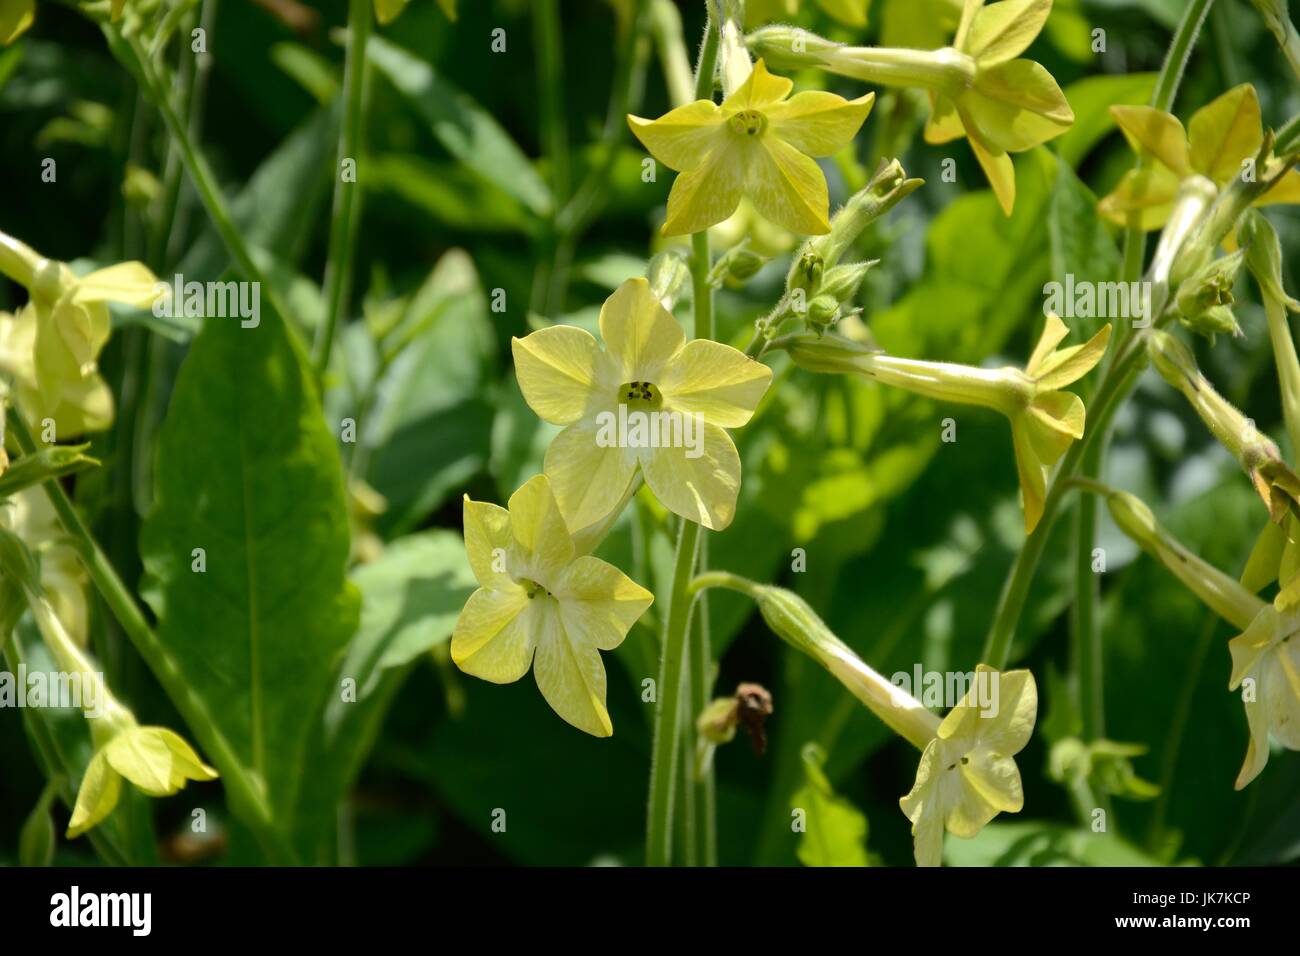 Nicotiana alta Lime Green flowers Tobacco Plant Tobacco flower Stock Photo